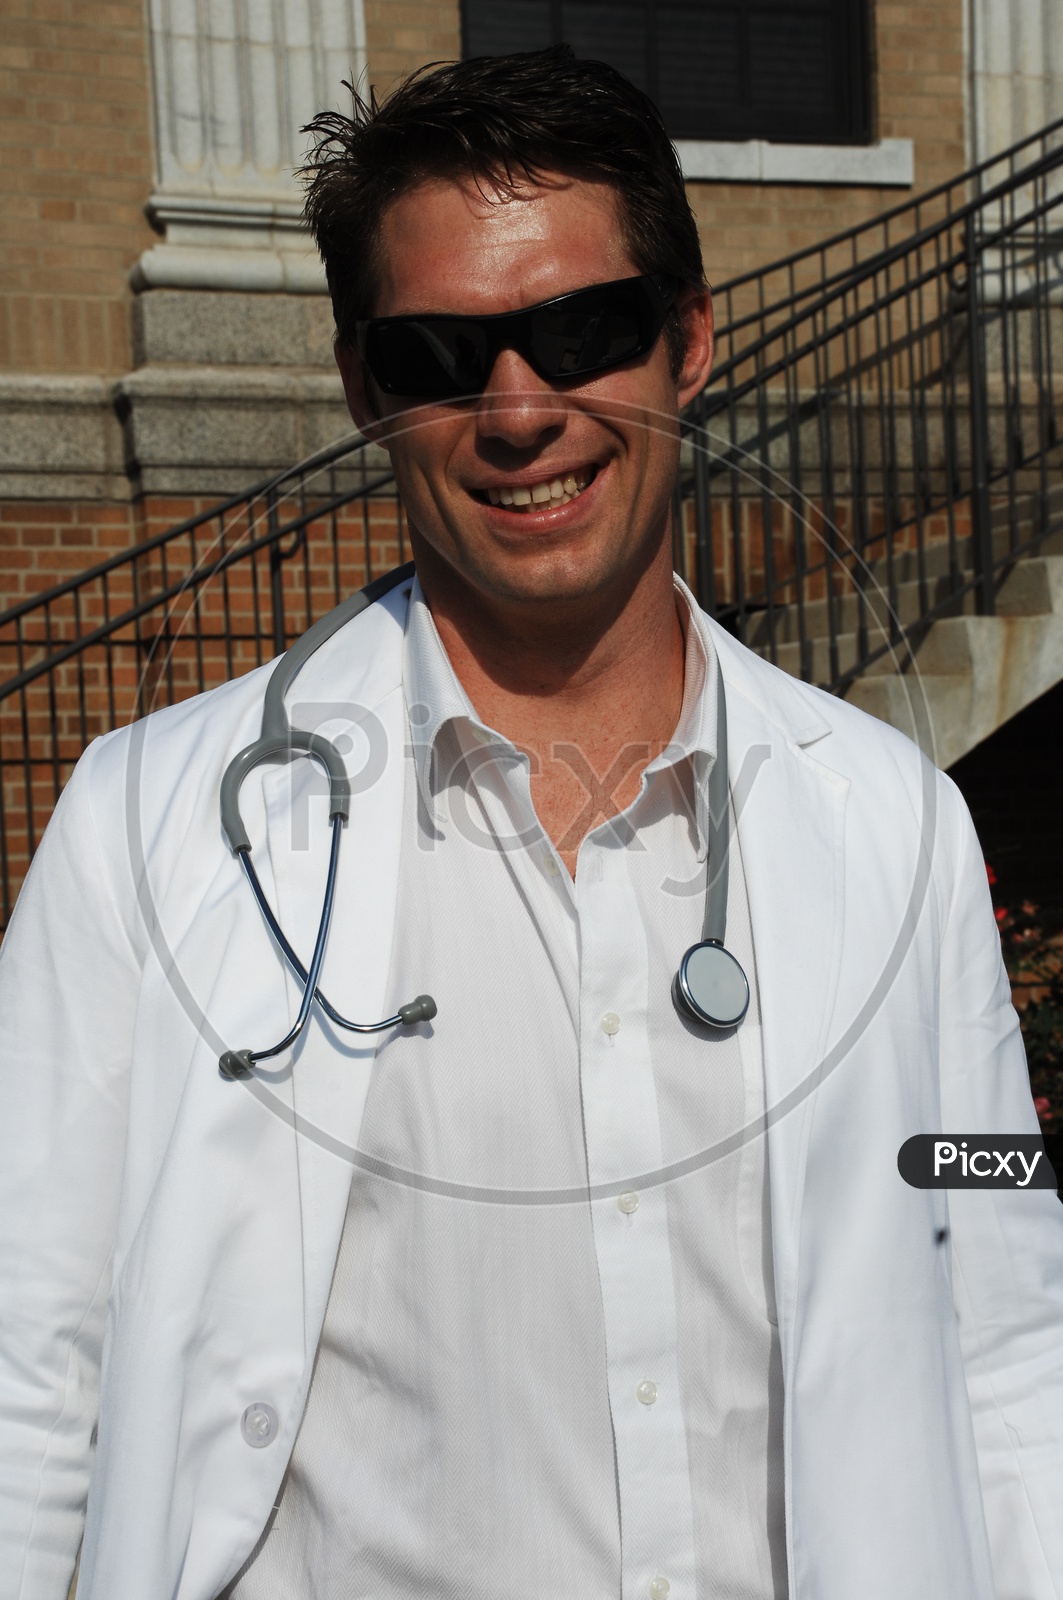 A male smiling doctors wearing white coat with stethoscope